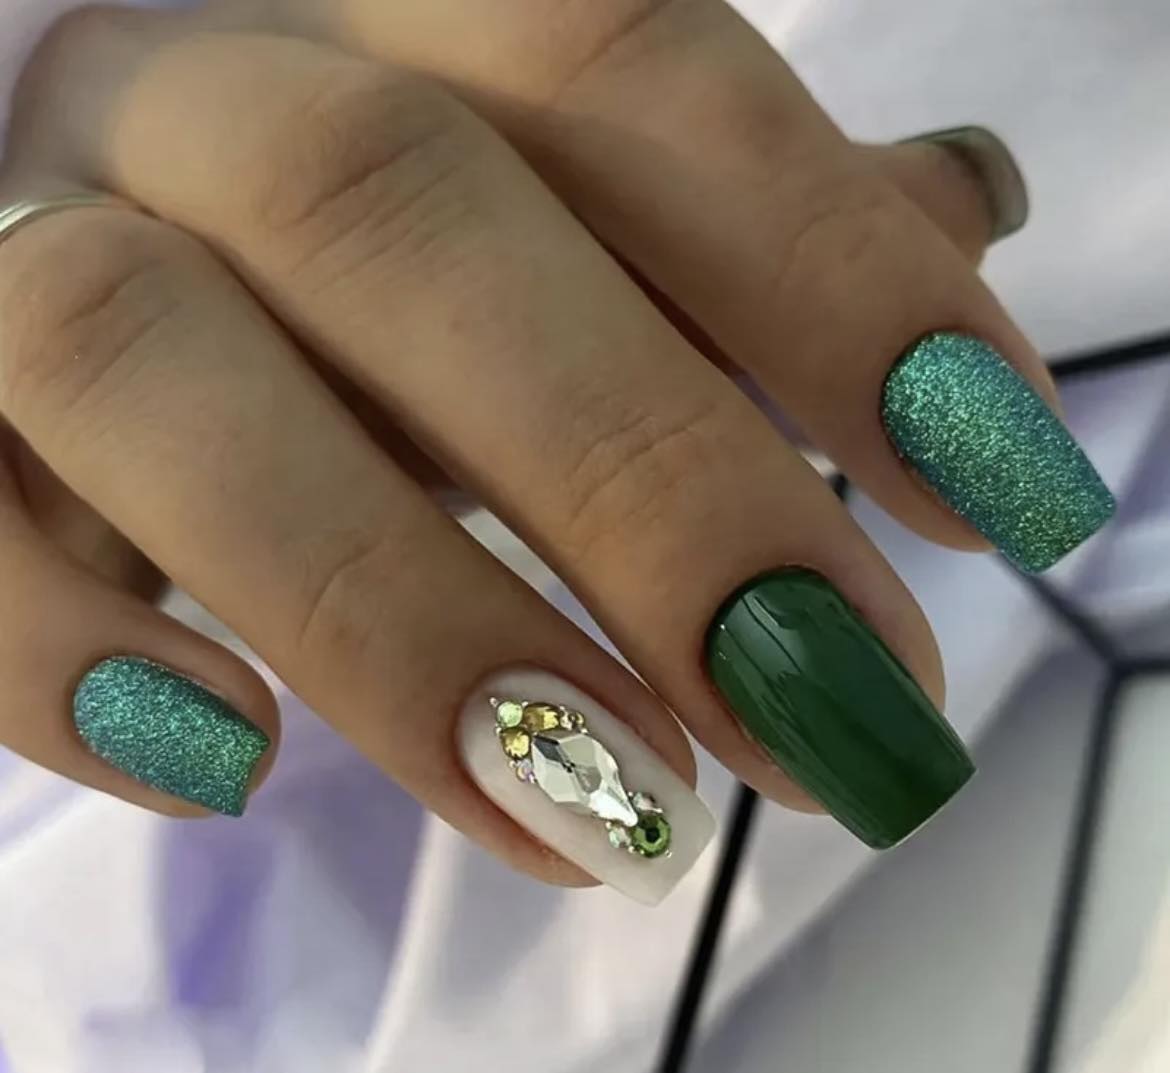 Square Press on Nails. Dark Green & Bright Green with Glitter & White with Jewels. Durable Acrylic Press on Nails. Easy and quick to apply. Great for those special occasions, parties or add an edge to any outfit. Gorgeous, flattering and you can re-use them again and again.